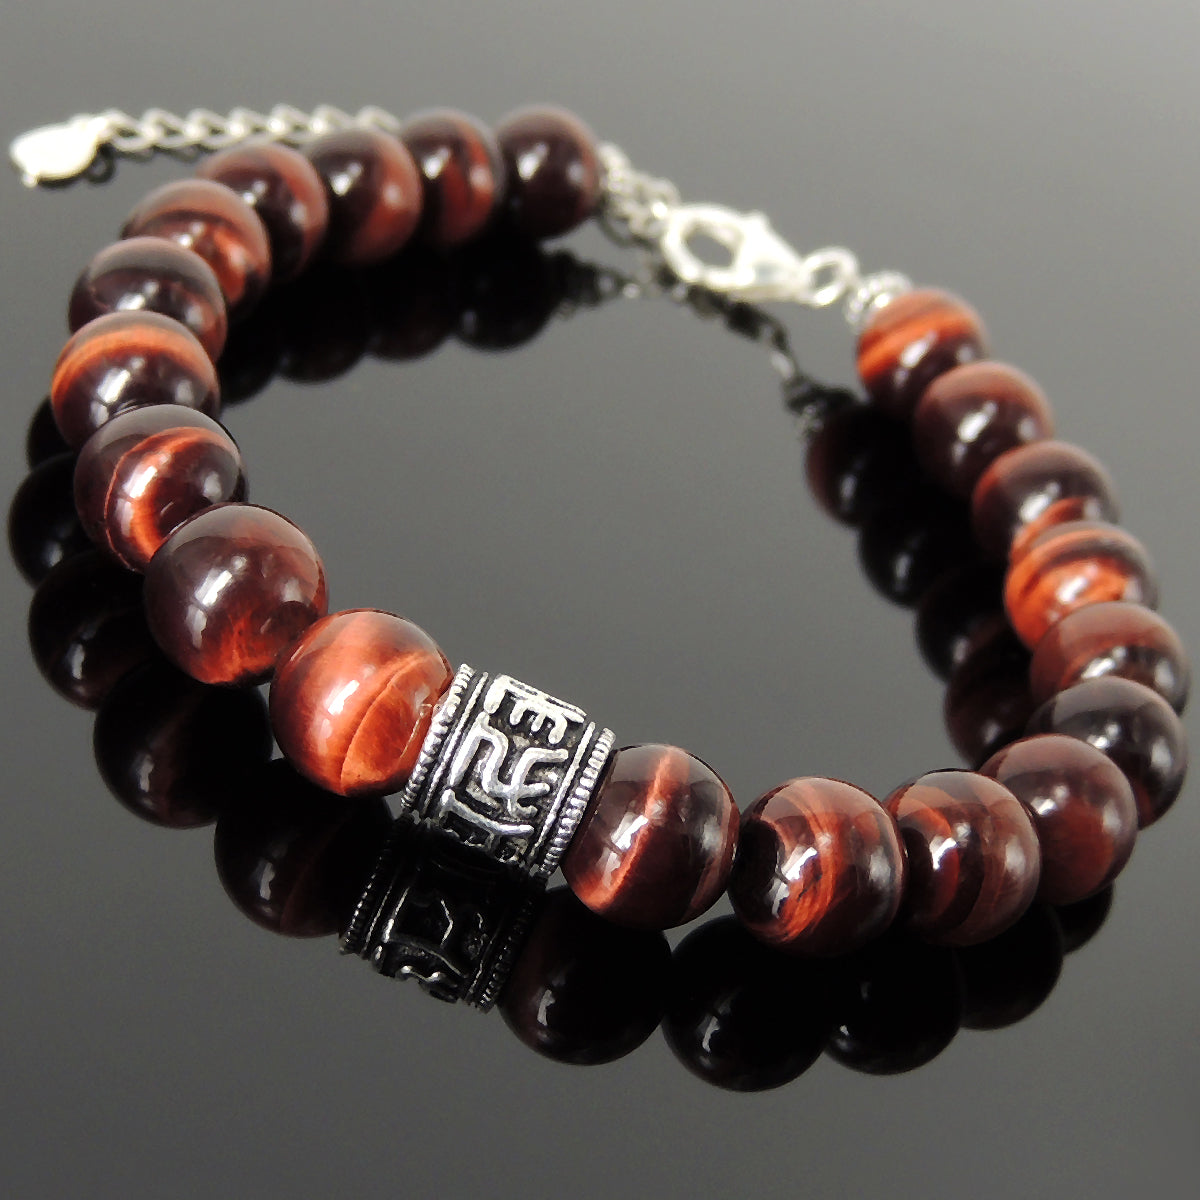 8mm Red Tiger Eye Healing Gemstone Bracelet with S925 Sterling Silver Spiritual Anchor Mantra Charm, Chain & Clasp - Handmade by Gem & Silver BR1424